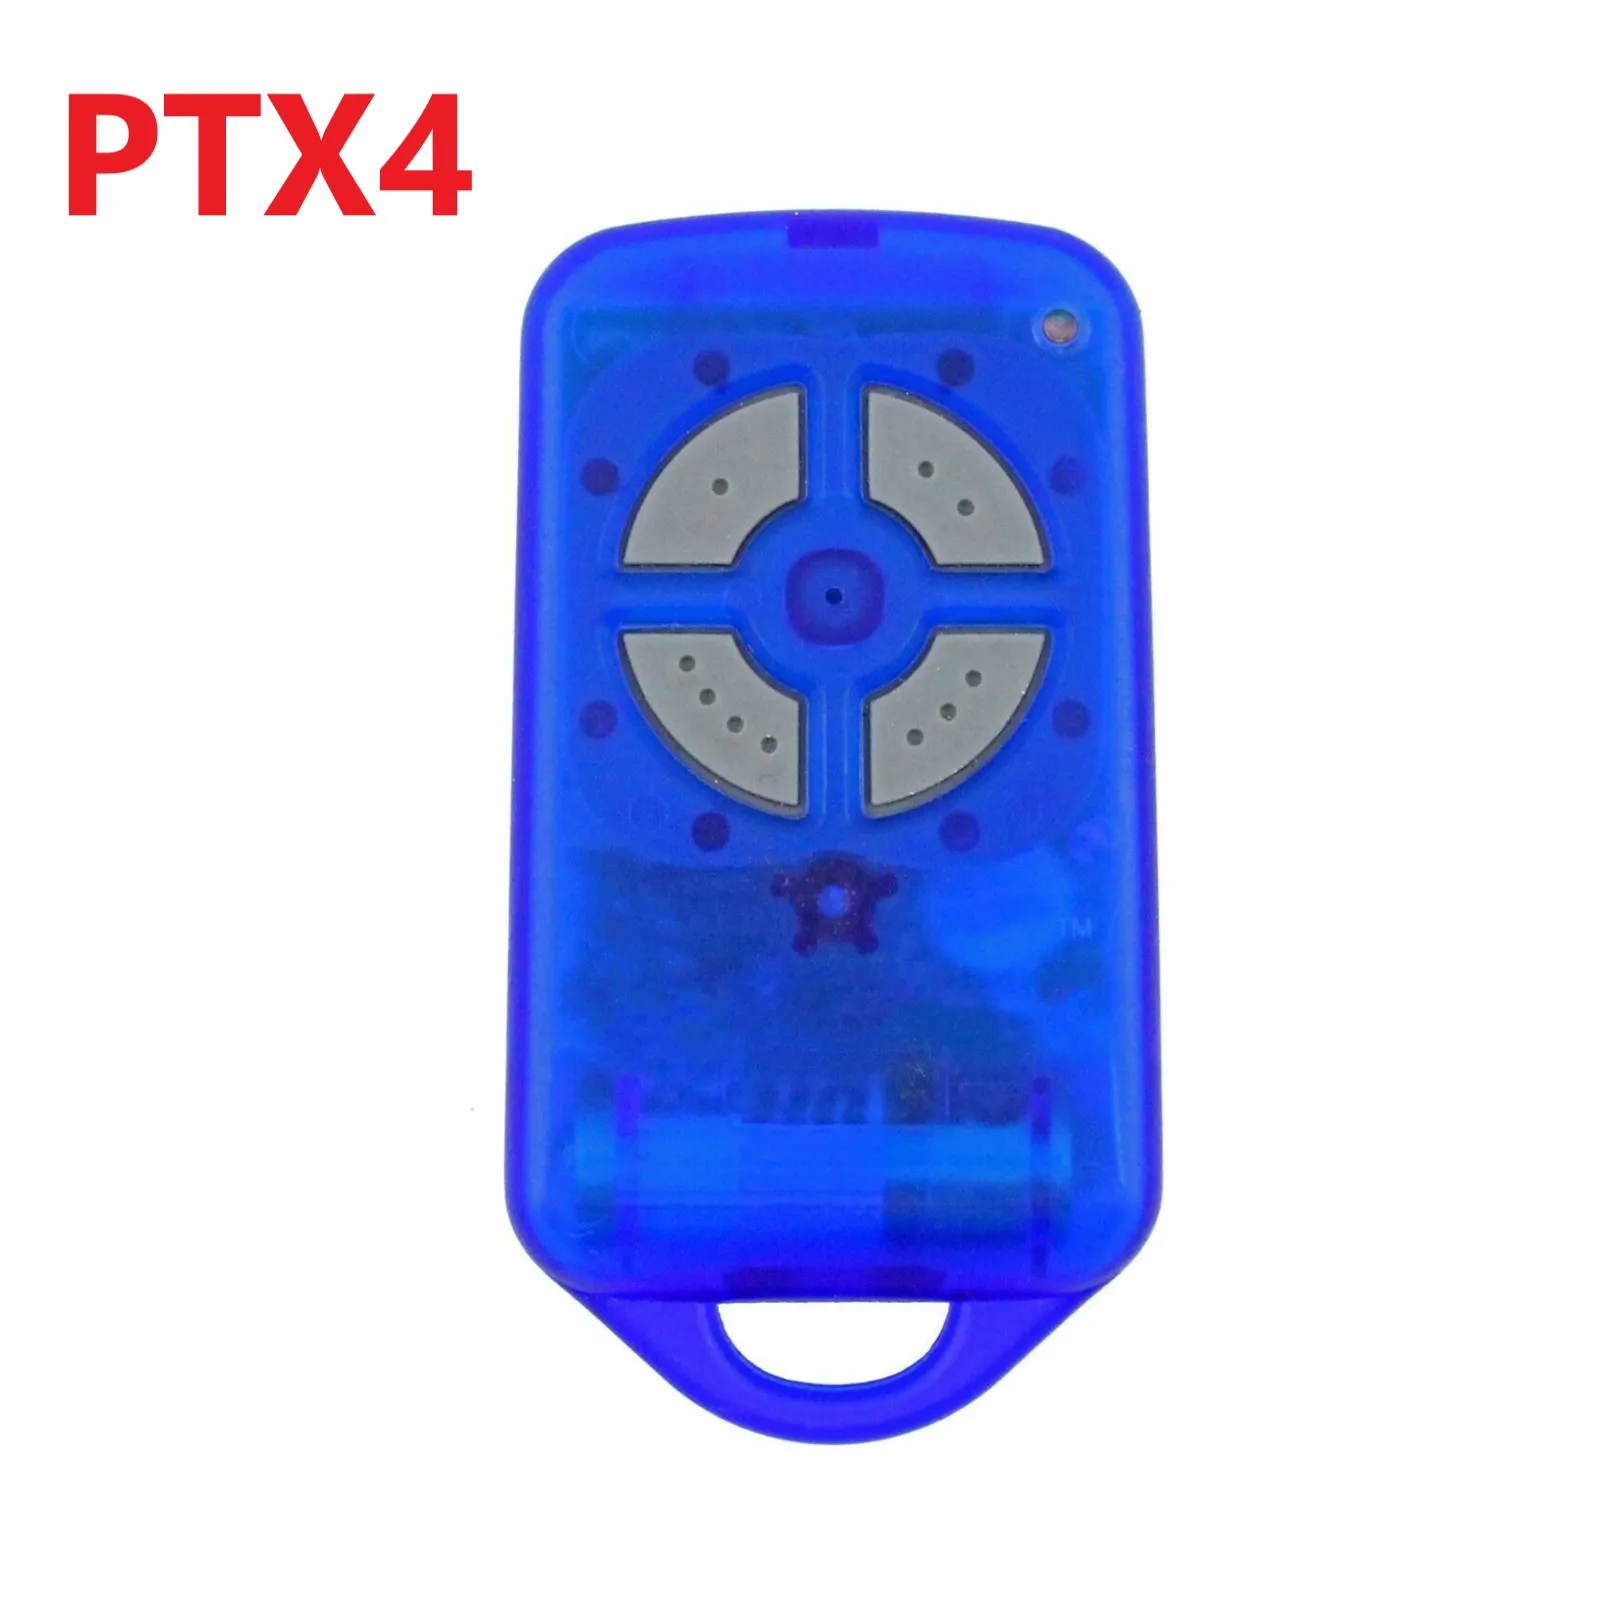 For ATA PTX4 433.92 MHz 4 Button Garage/Gate Door Replacement Remote Control Transmitter